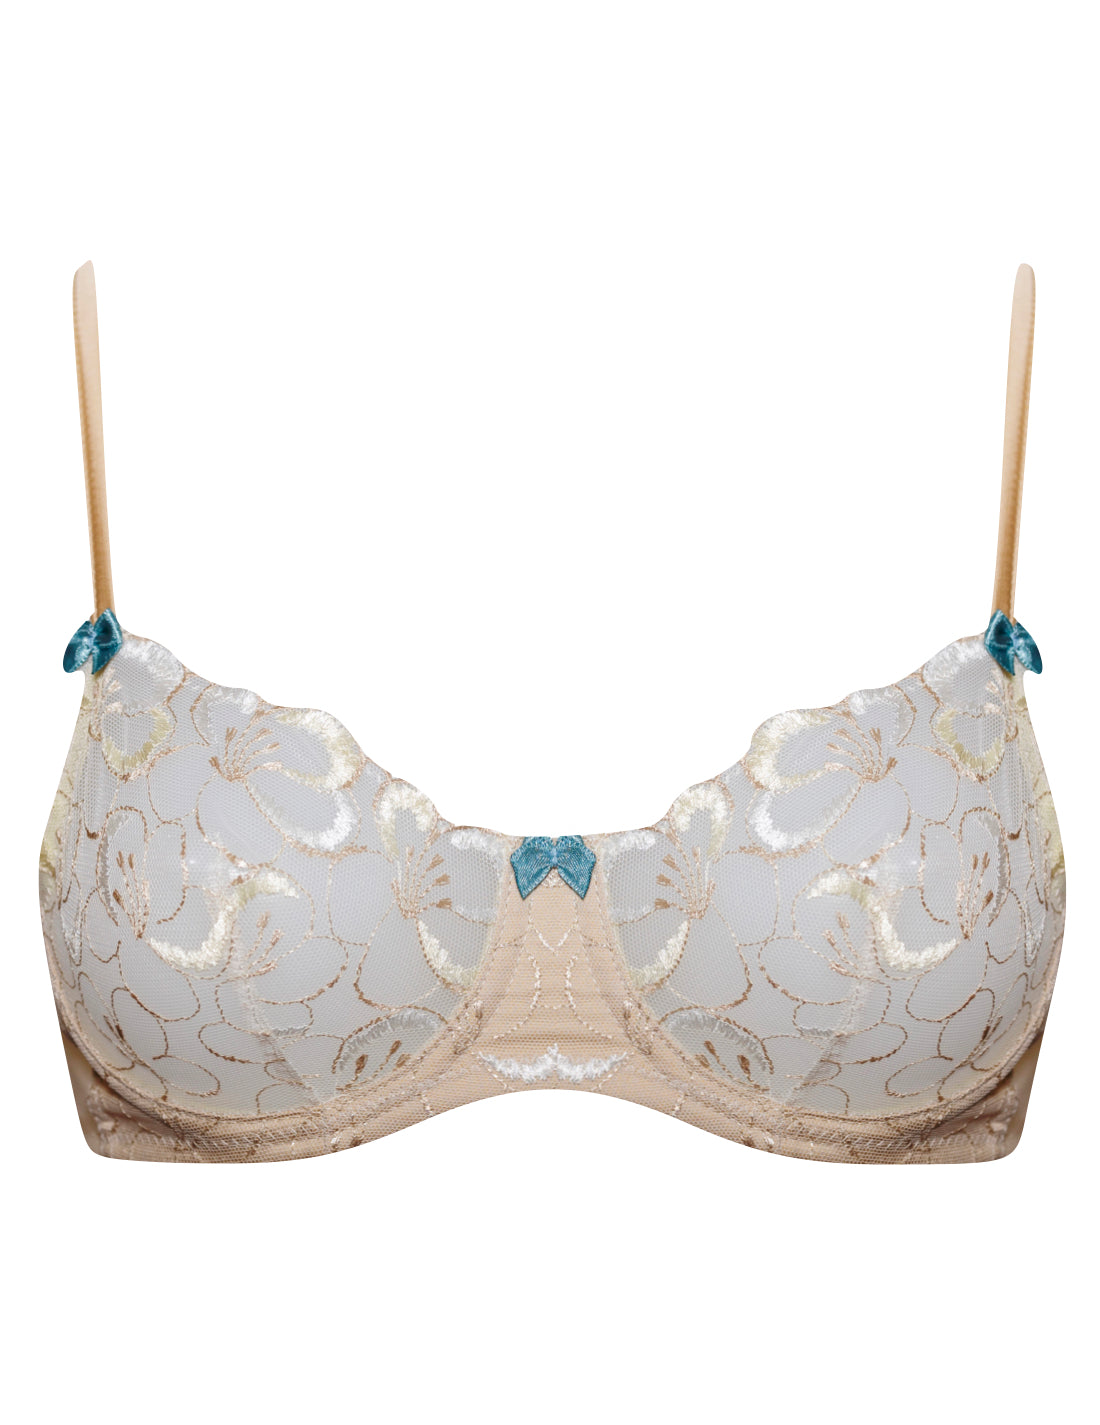 Lingerie Review: Mimi Holliday Sugared Almond Bra & High Waist